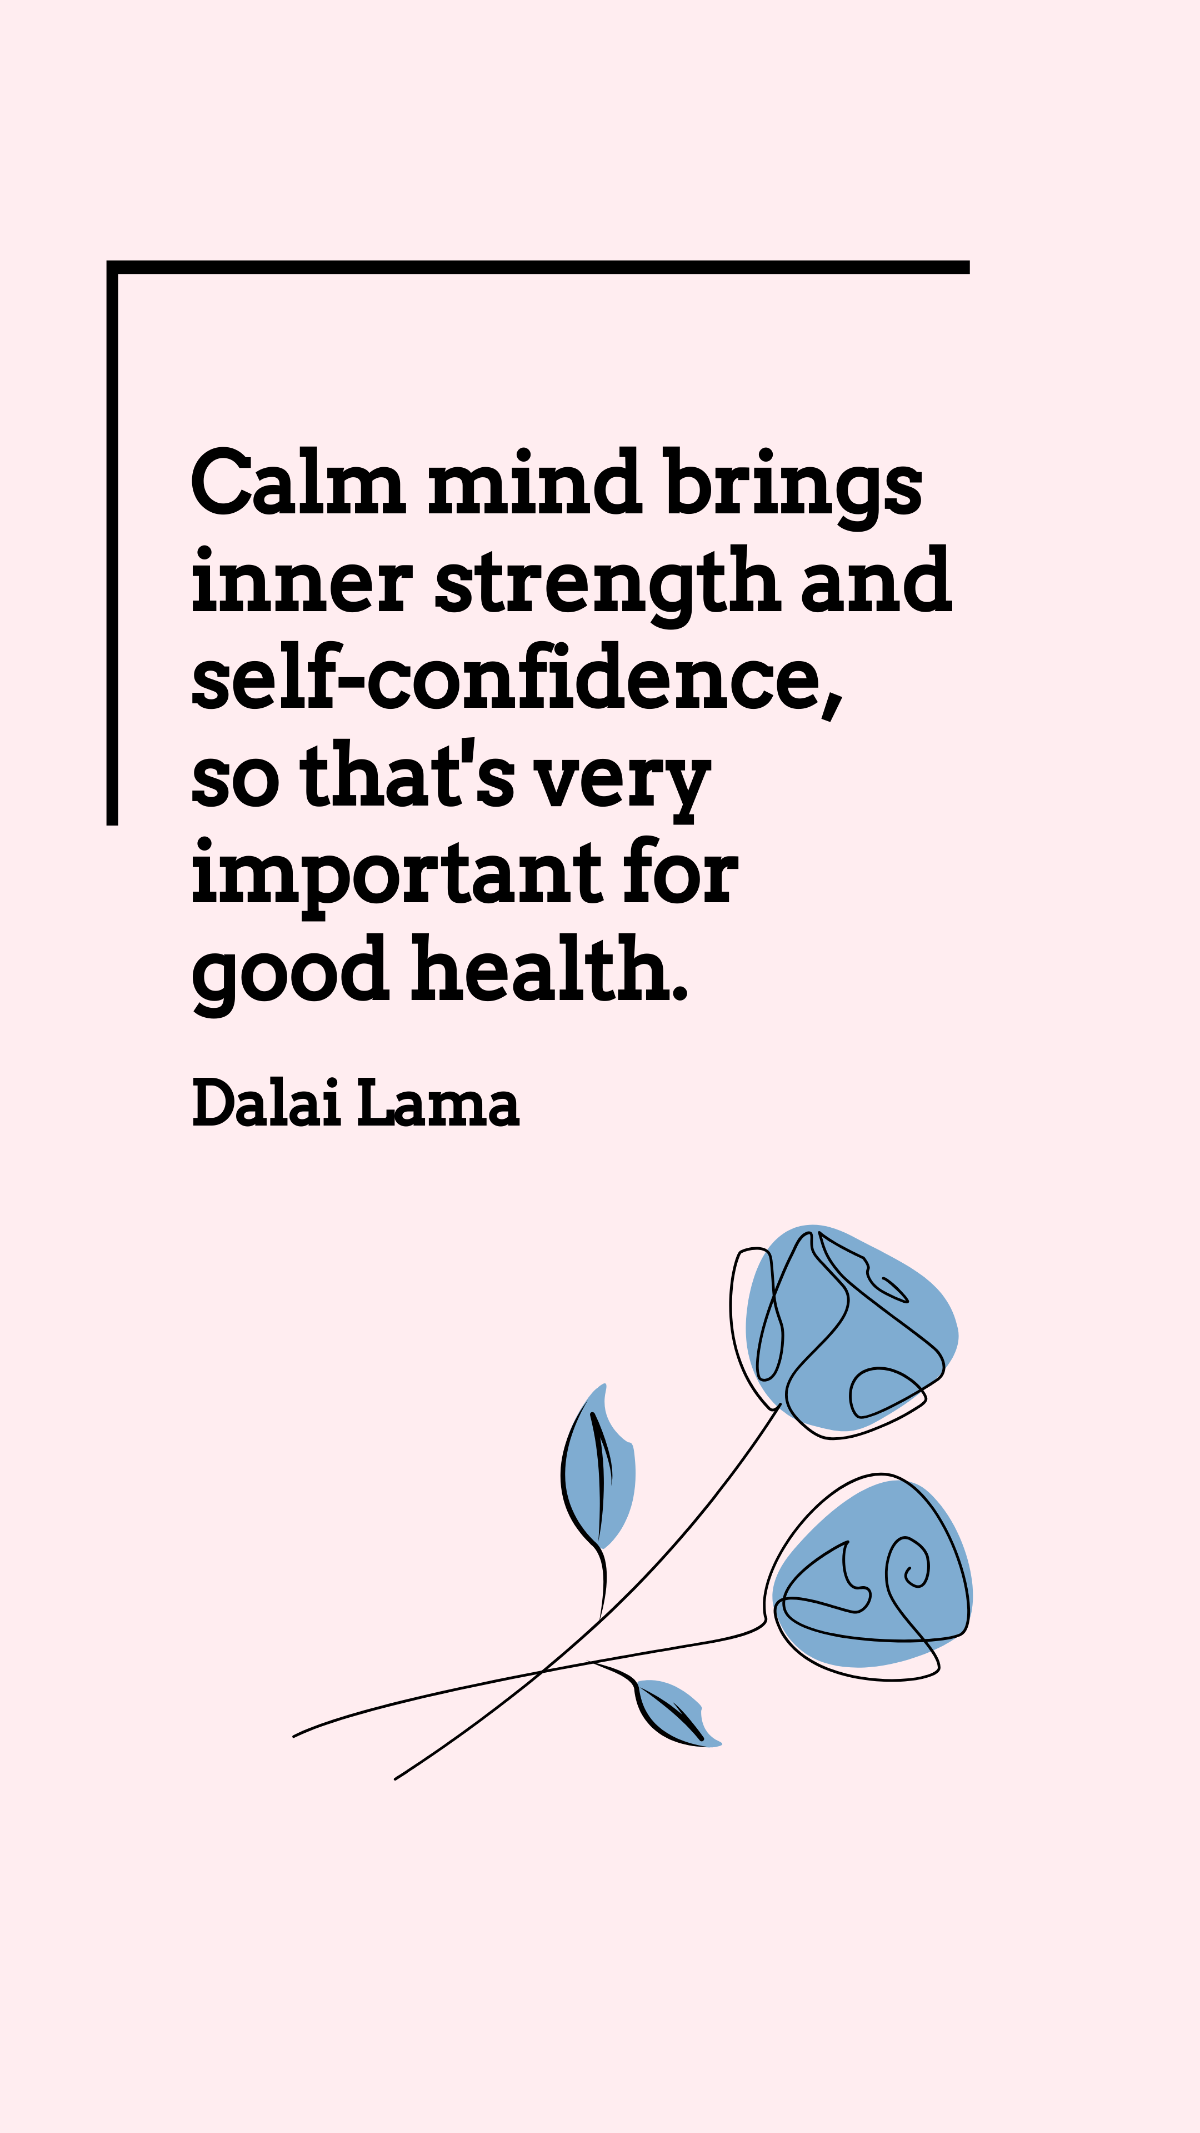 Dalai Lama - Calm mind brings inner strength and self-confidence, so that's very important for good health. Template